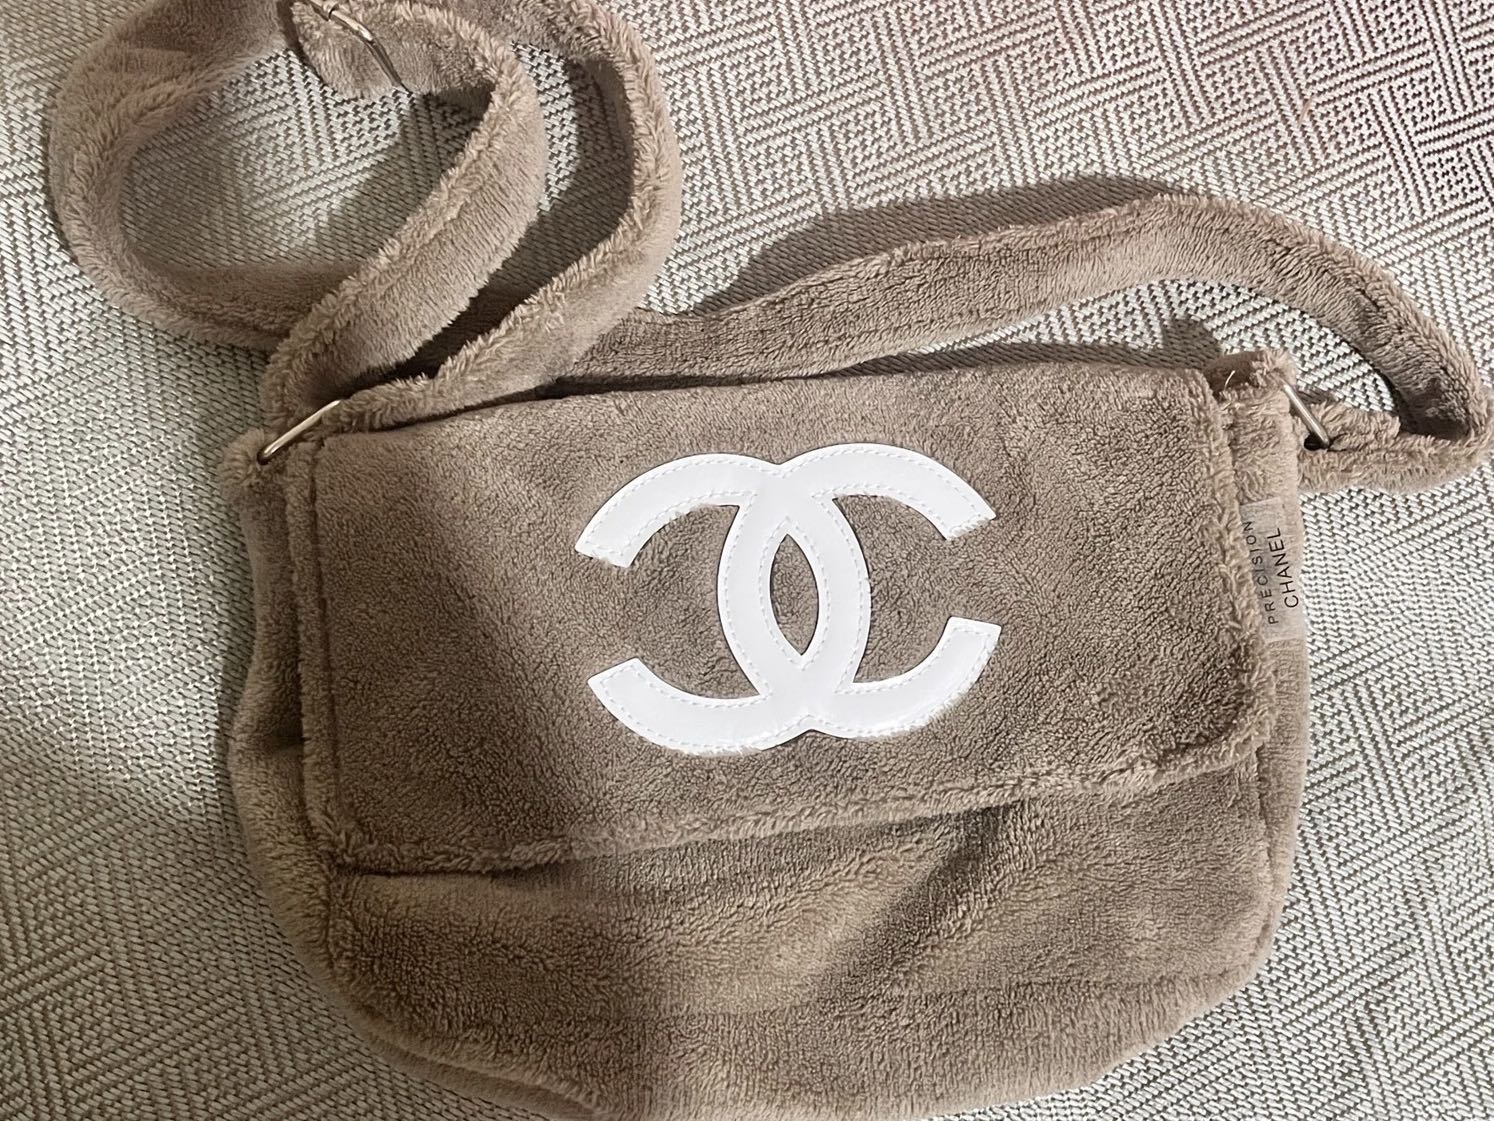 chanel pink beach bag tote